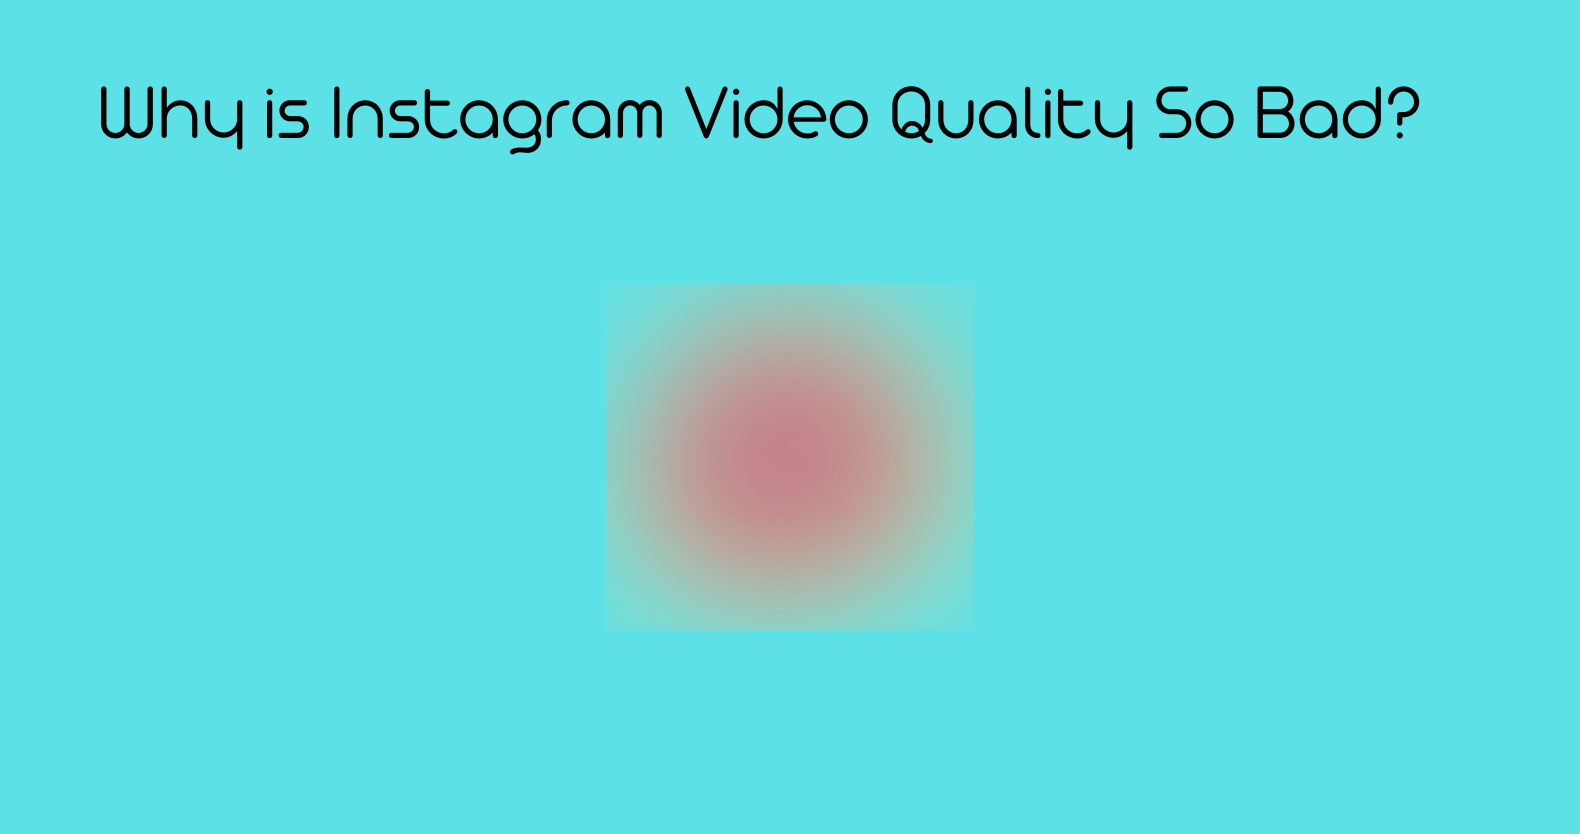 Why is Instagram Video Quality So Bad?